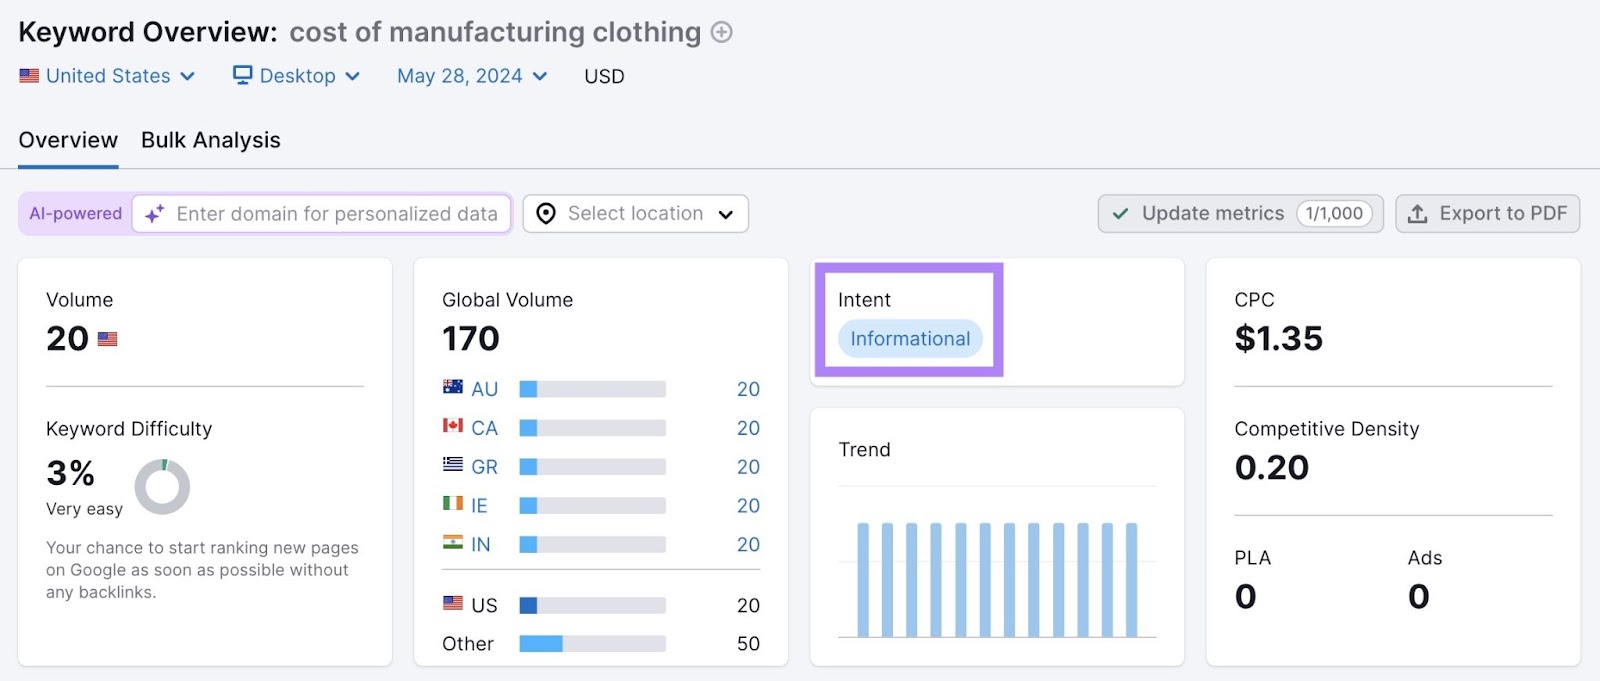 Keyword overview for the term "cost of manufacturing clothing" with "Intent" highlighted.